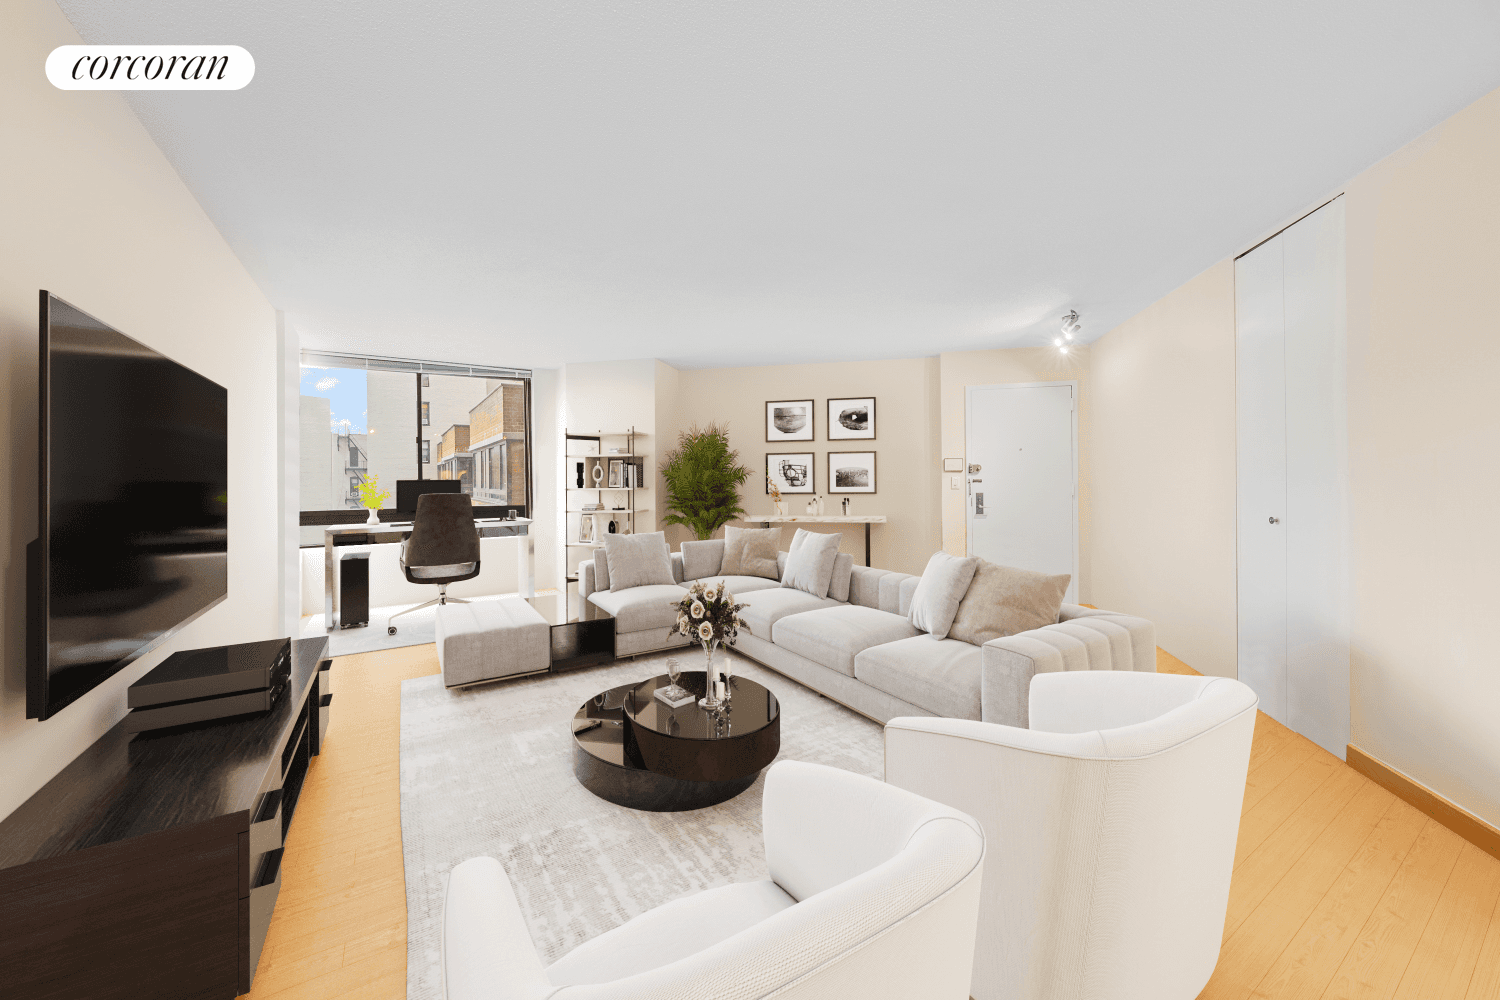 Own an exclusive piece of Upper West Side charm with this exquisite 1 bedroom apartment located in the esteemed Bromley condominium at 225 West 83rd Street.